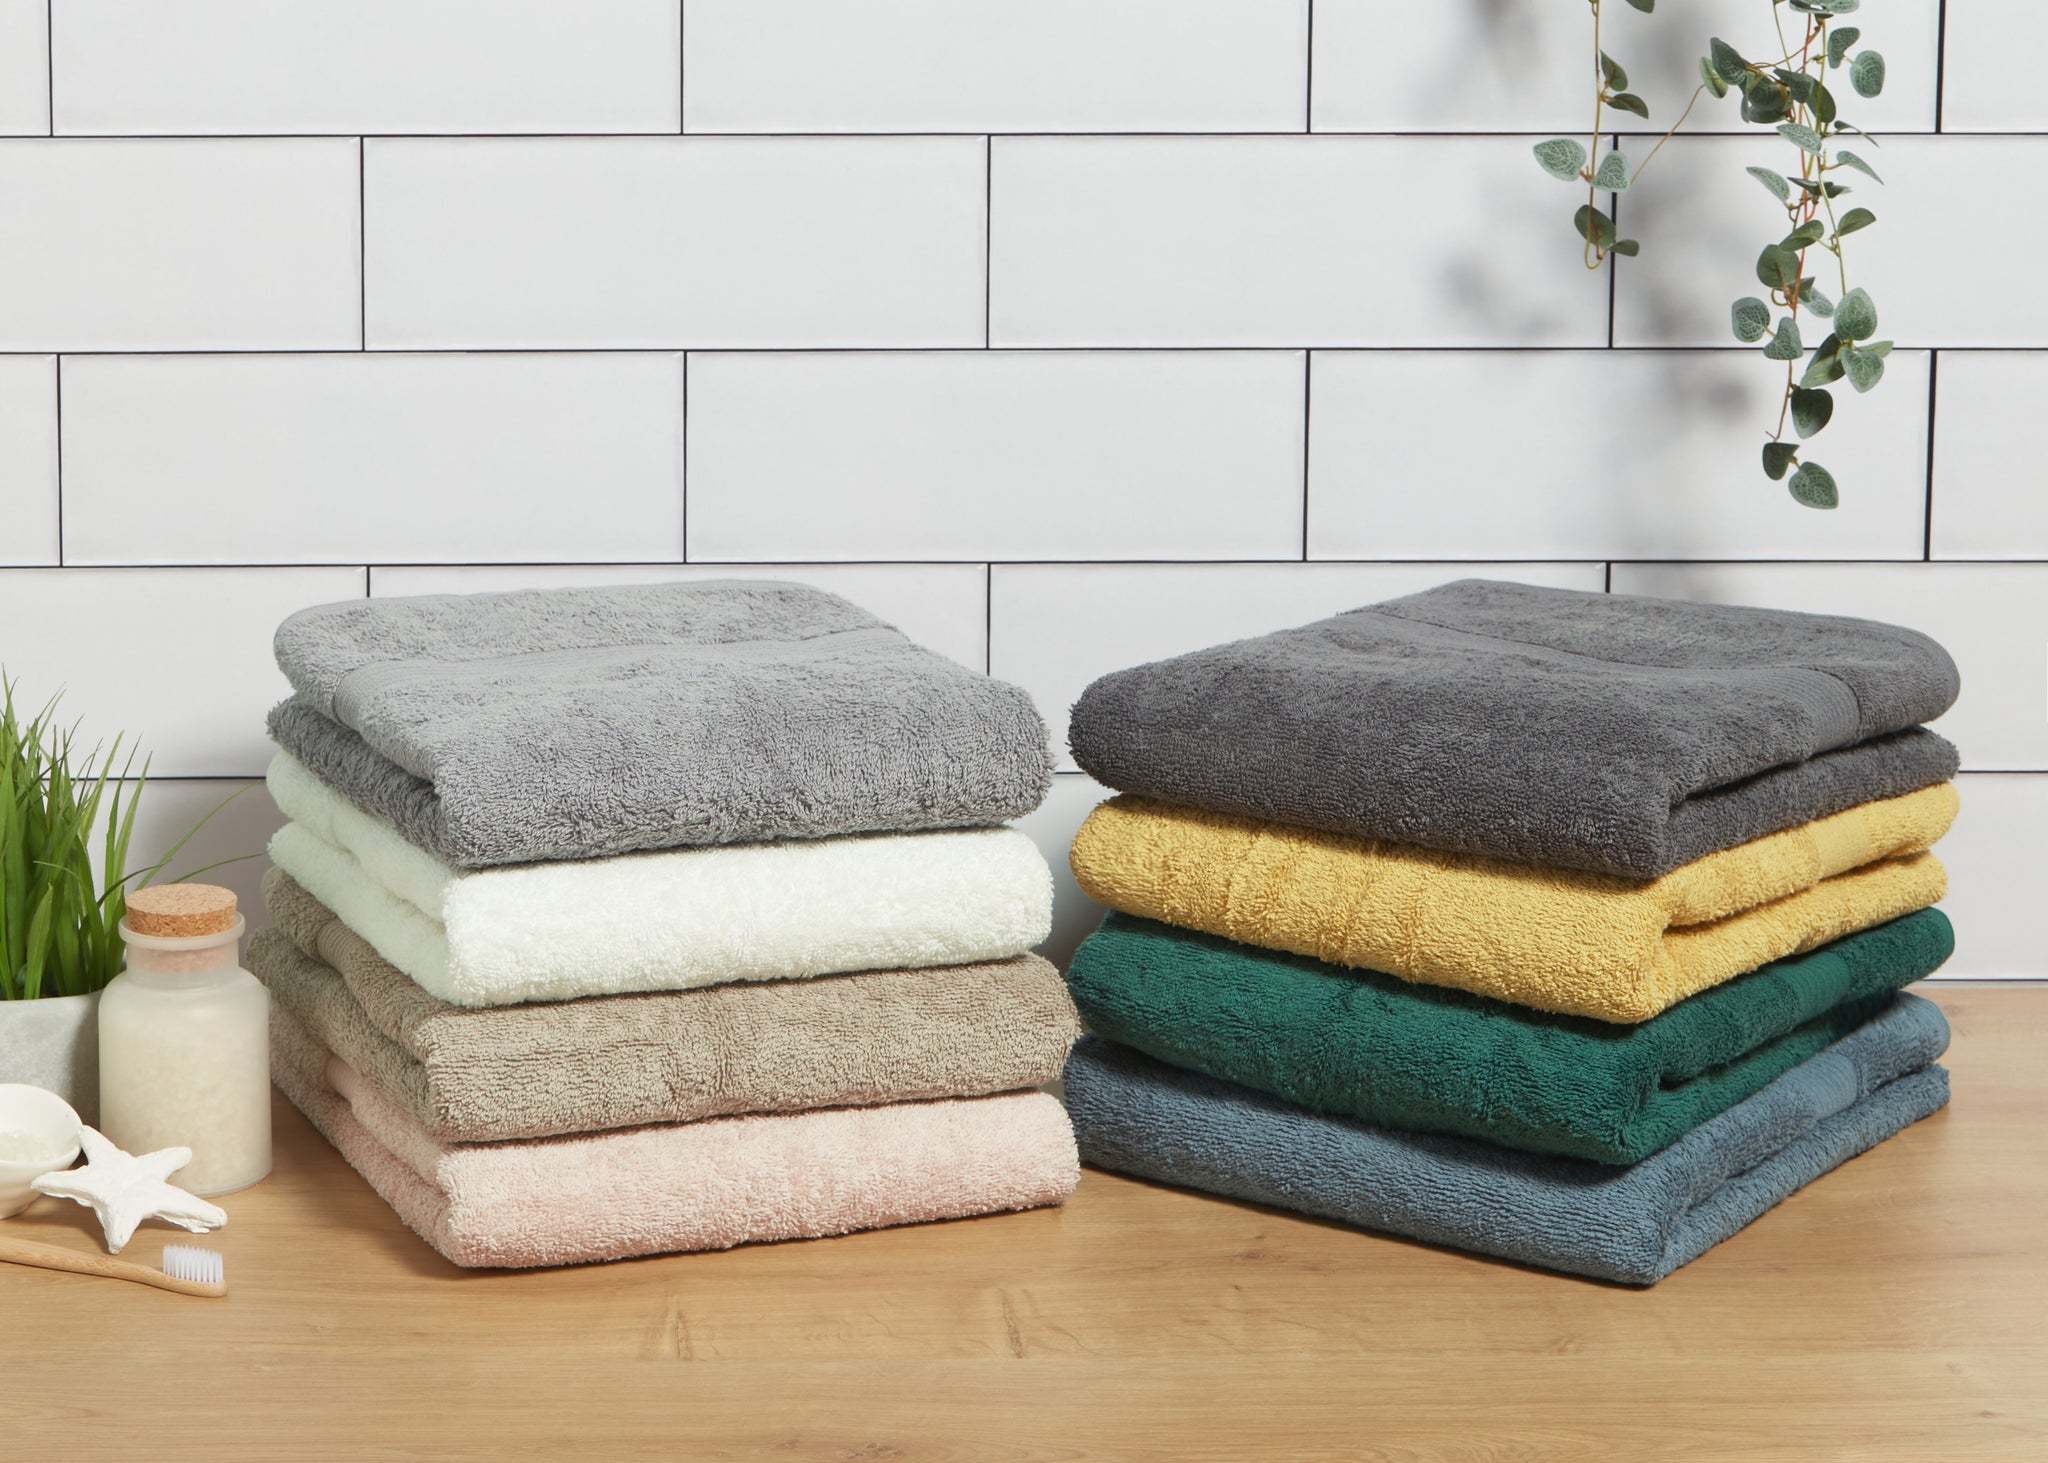 Christy Towels  Williamsons – Williamsons Factory Shop